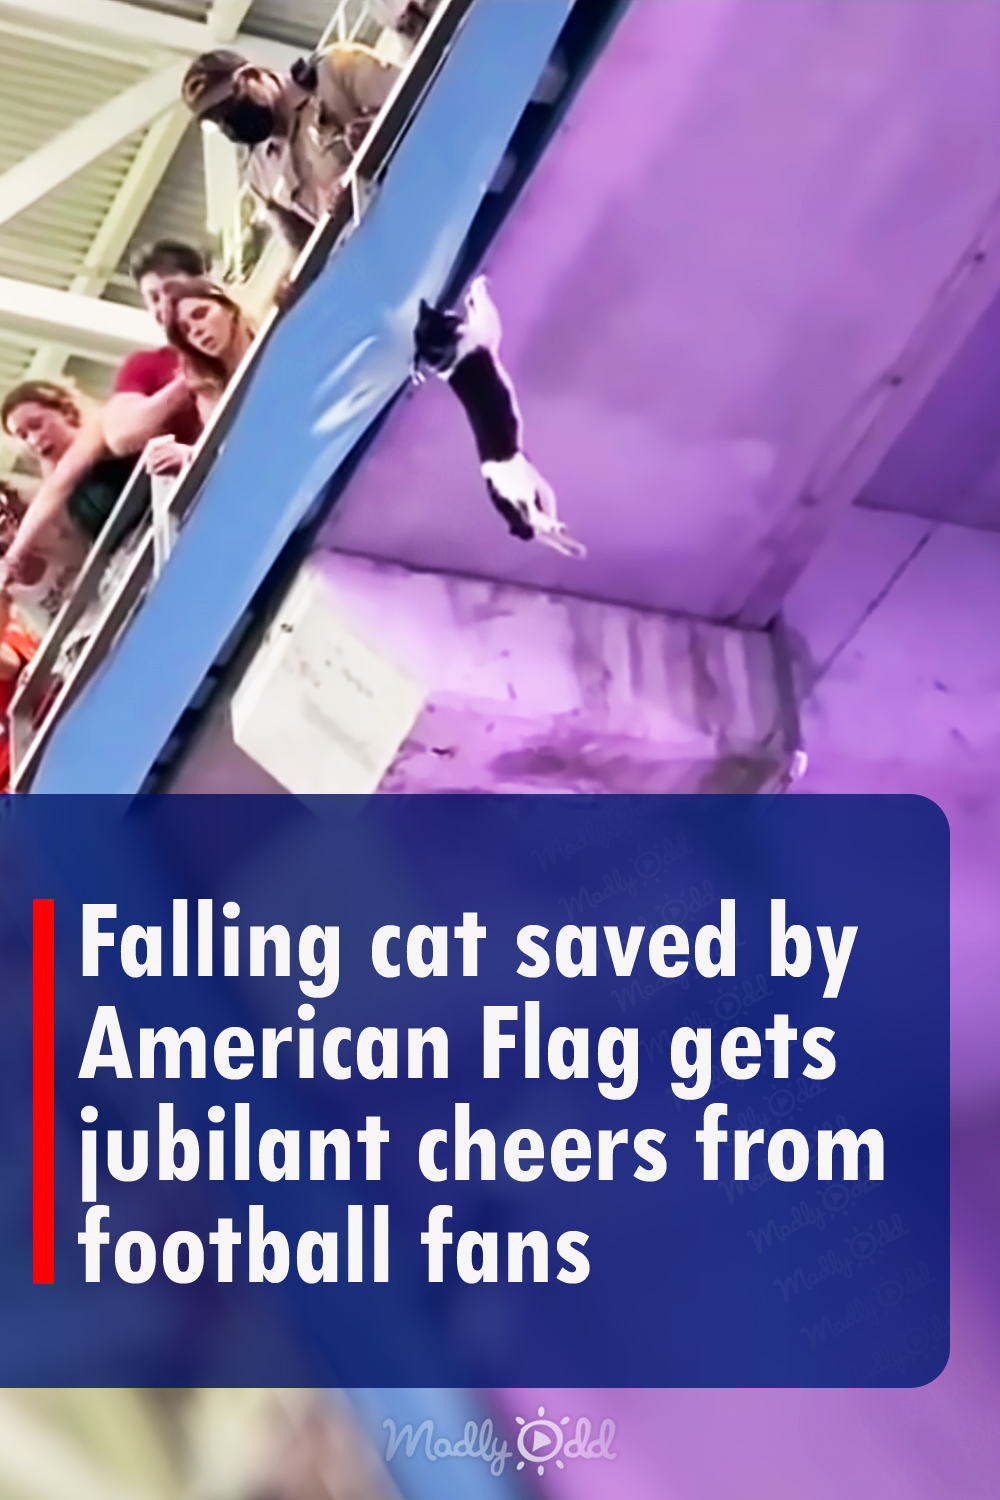 Falling cat saved by American Flag gets jubliant cheers from football fans